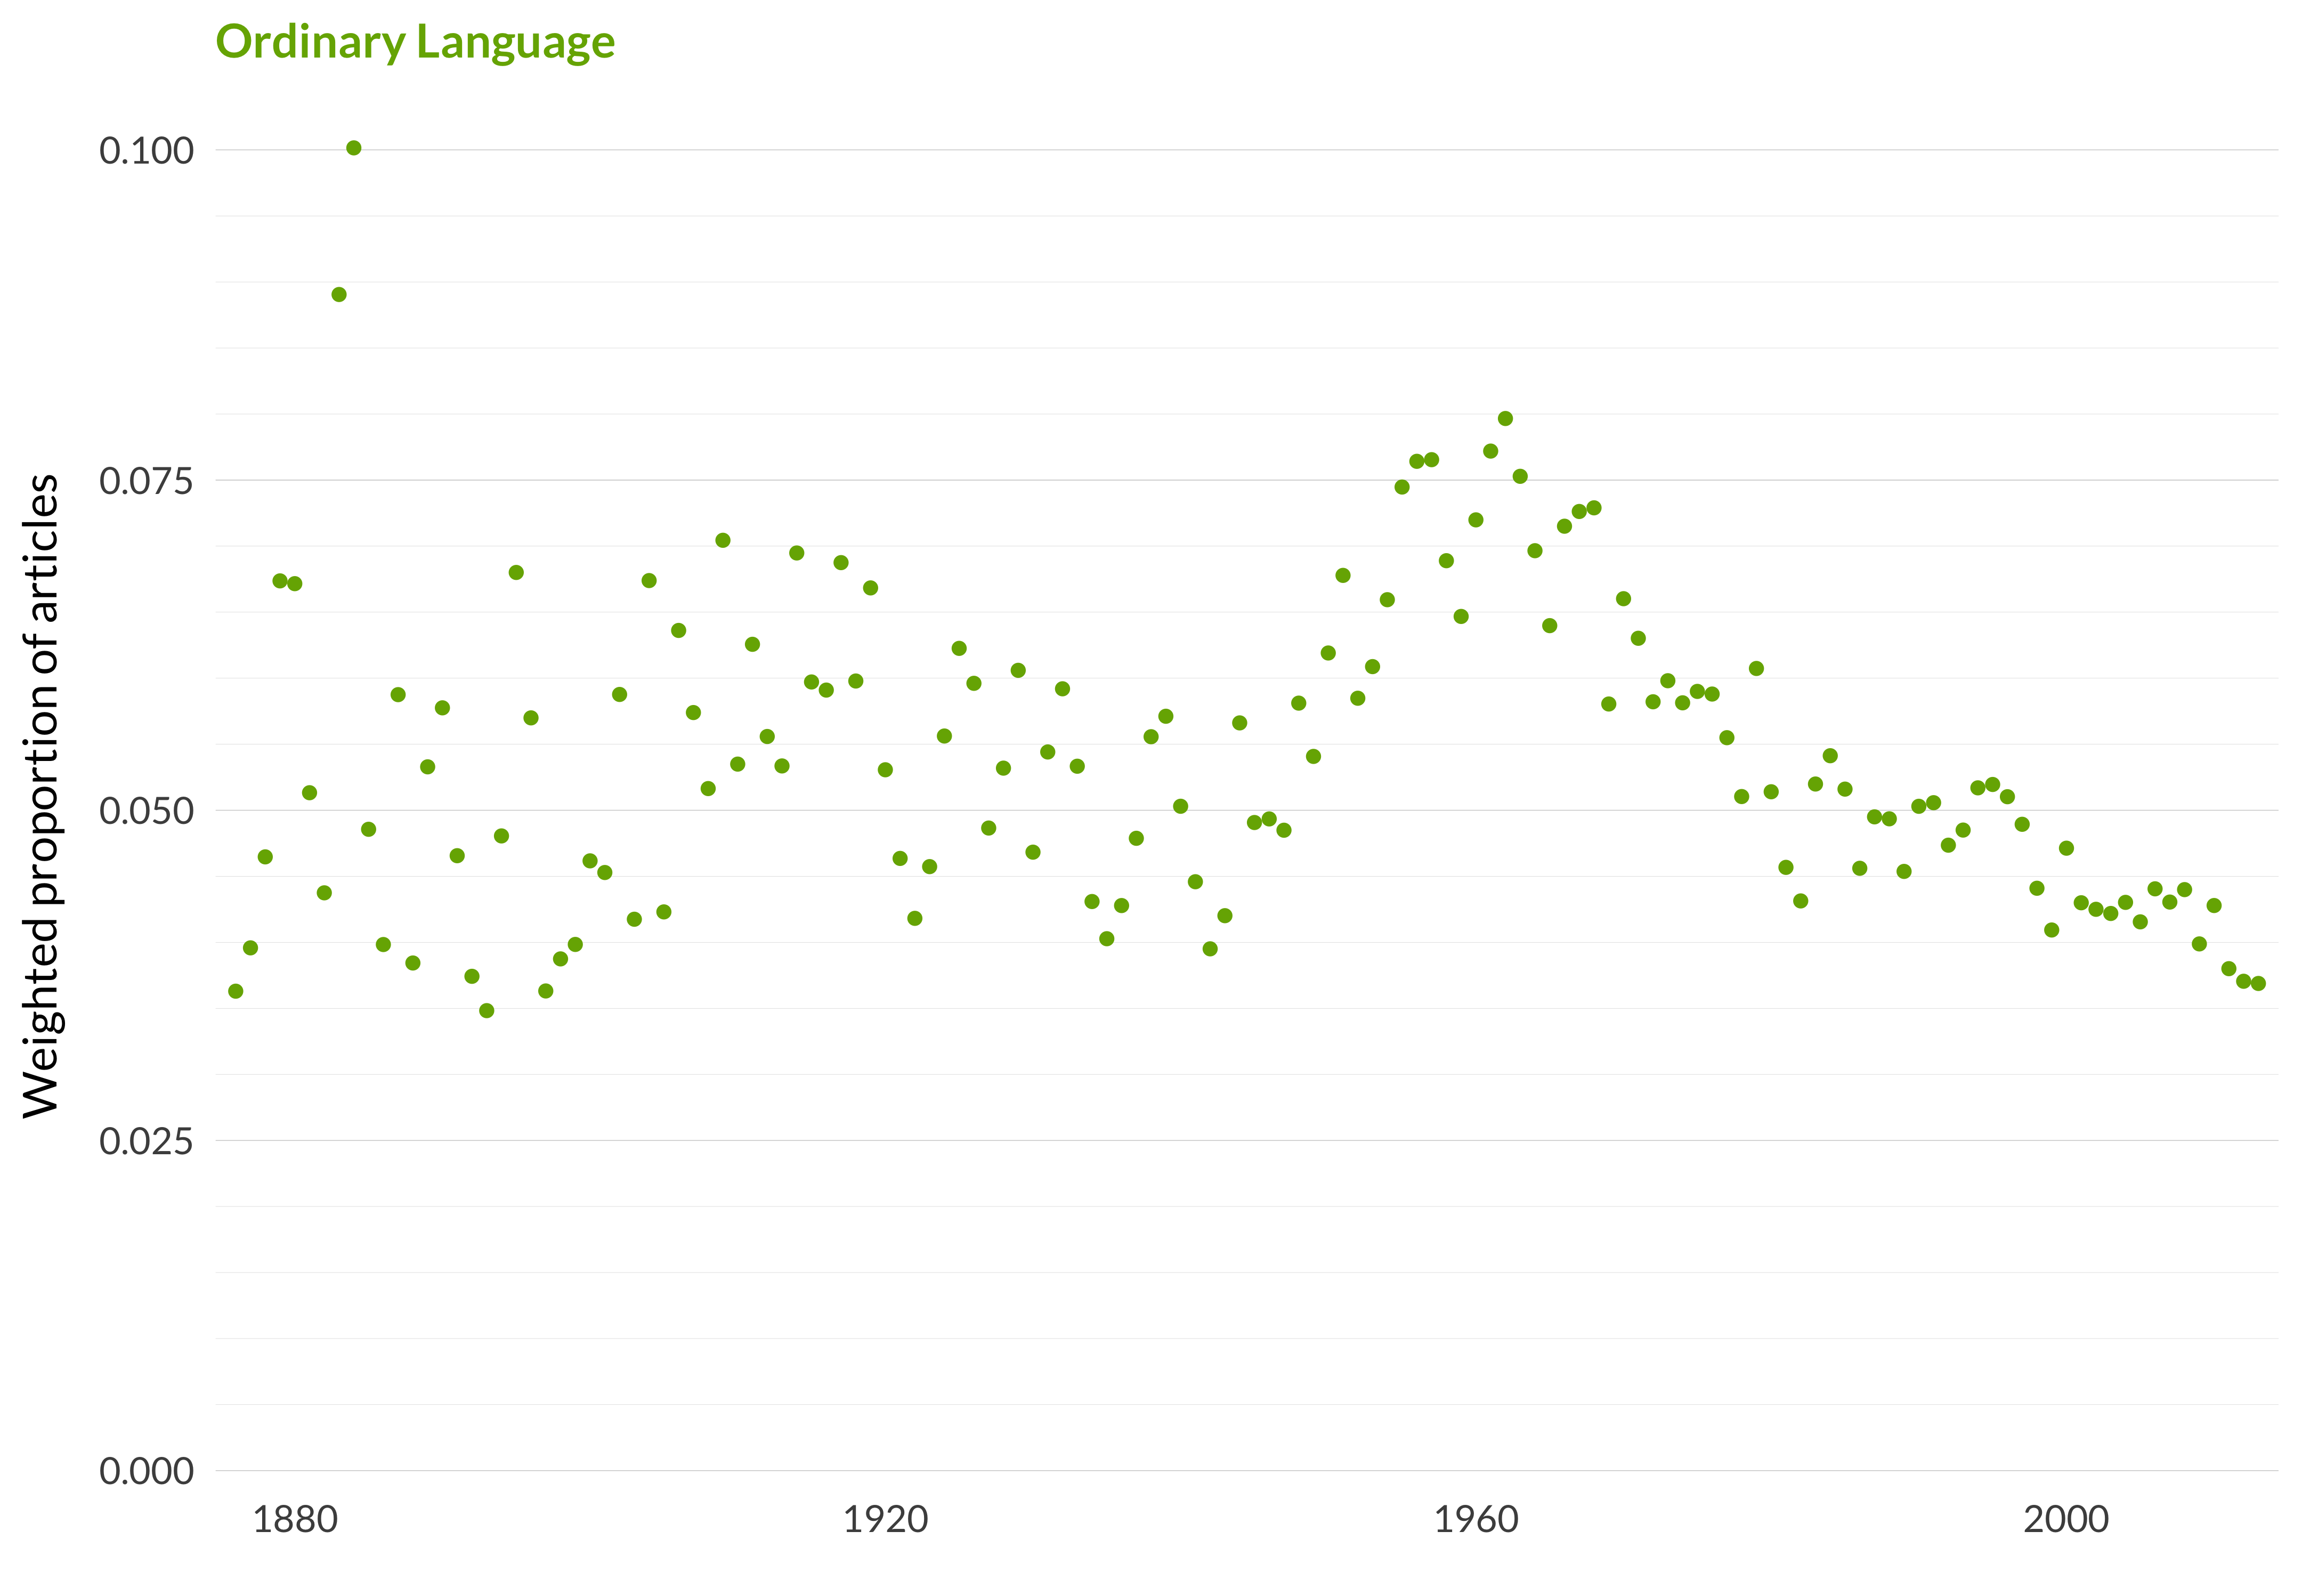 A scatterplot showing which proportion of articles each year are in the ordinary languagetopic. The x-axis shows the year, the y-axis measures the proportion of articles each year in this topic. There is one dot per year. The highest value is in 1884 when 10.0% of articles were in this topic. The lowest value is in 1893 when 3.5% of articles were in this topic. The full table that provides the data for this graph is available in Table A.24 in Appendix A.